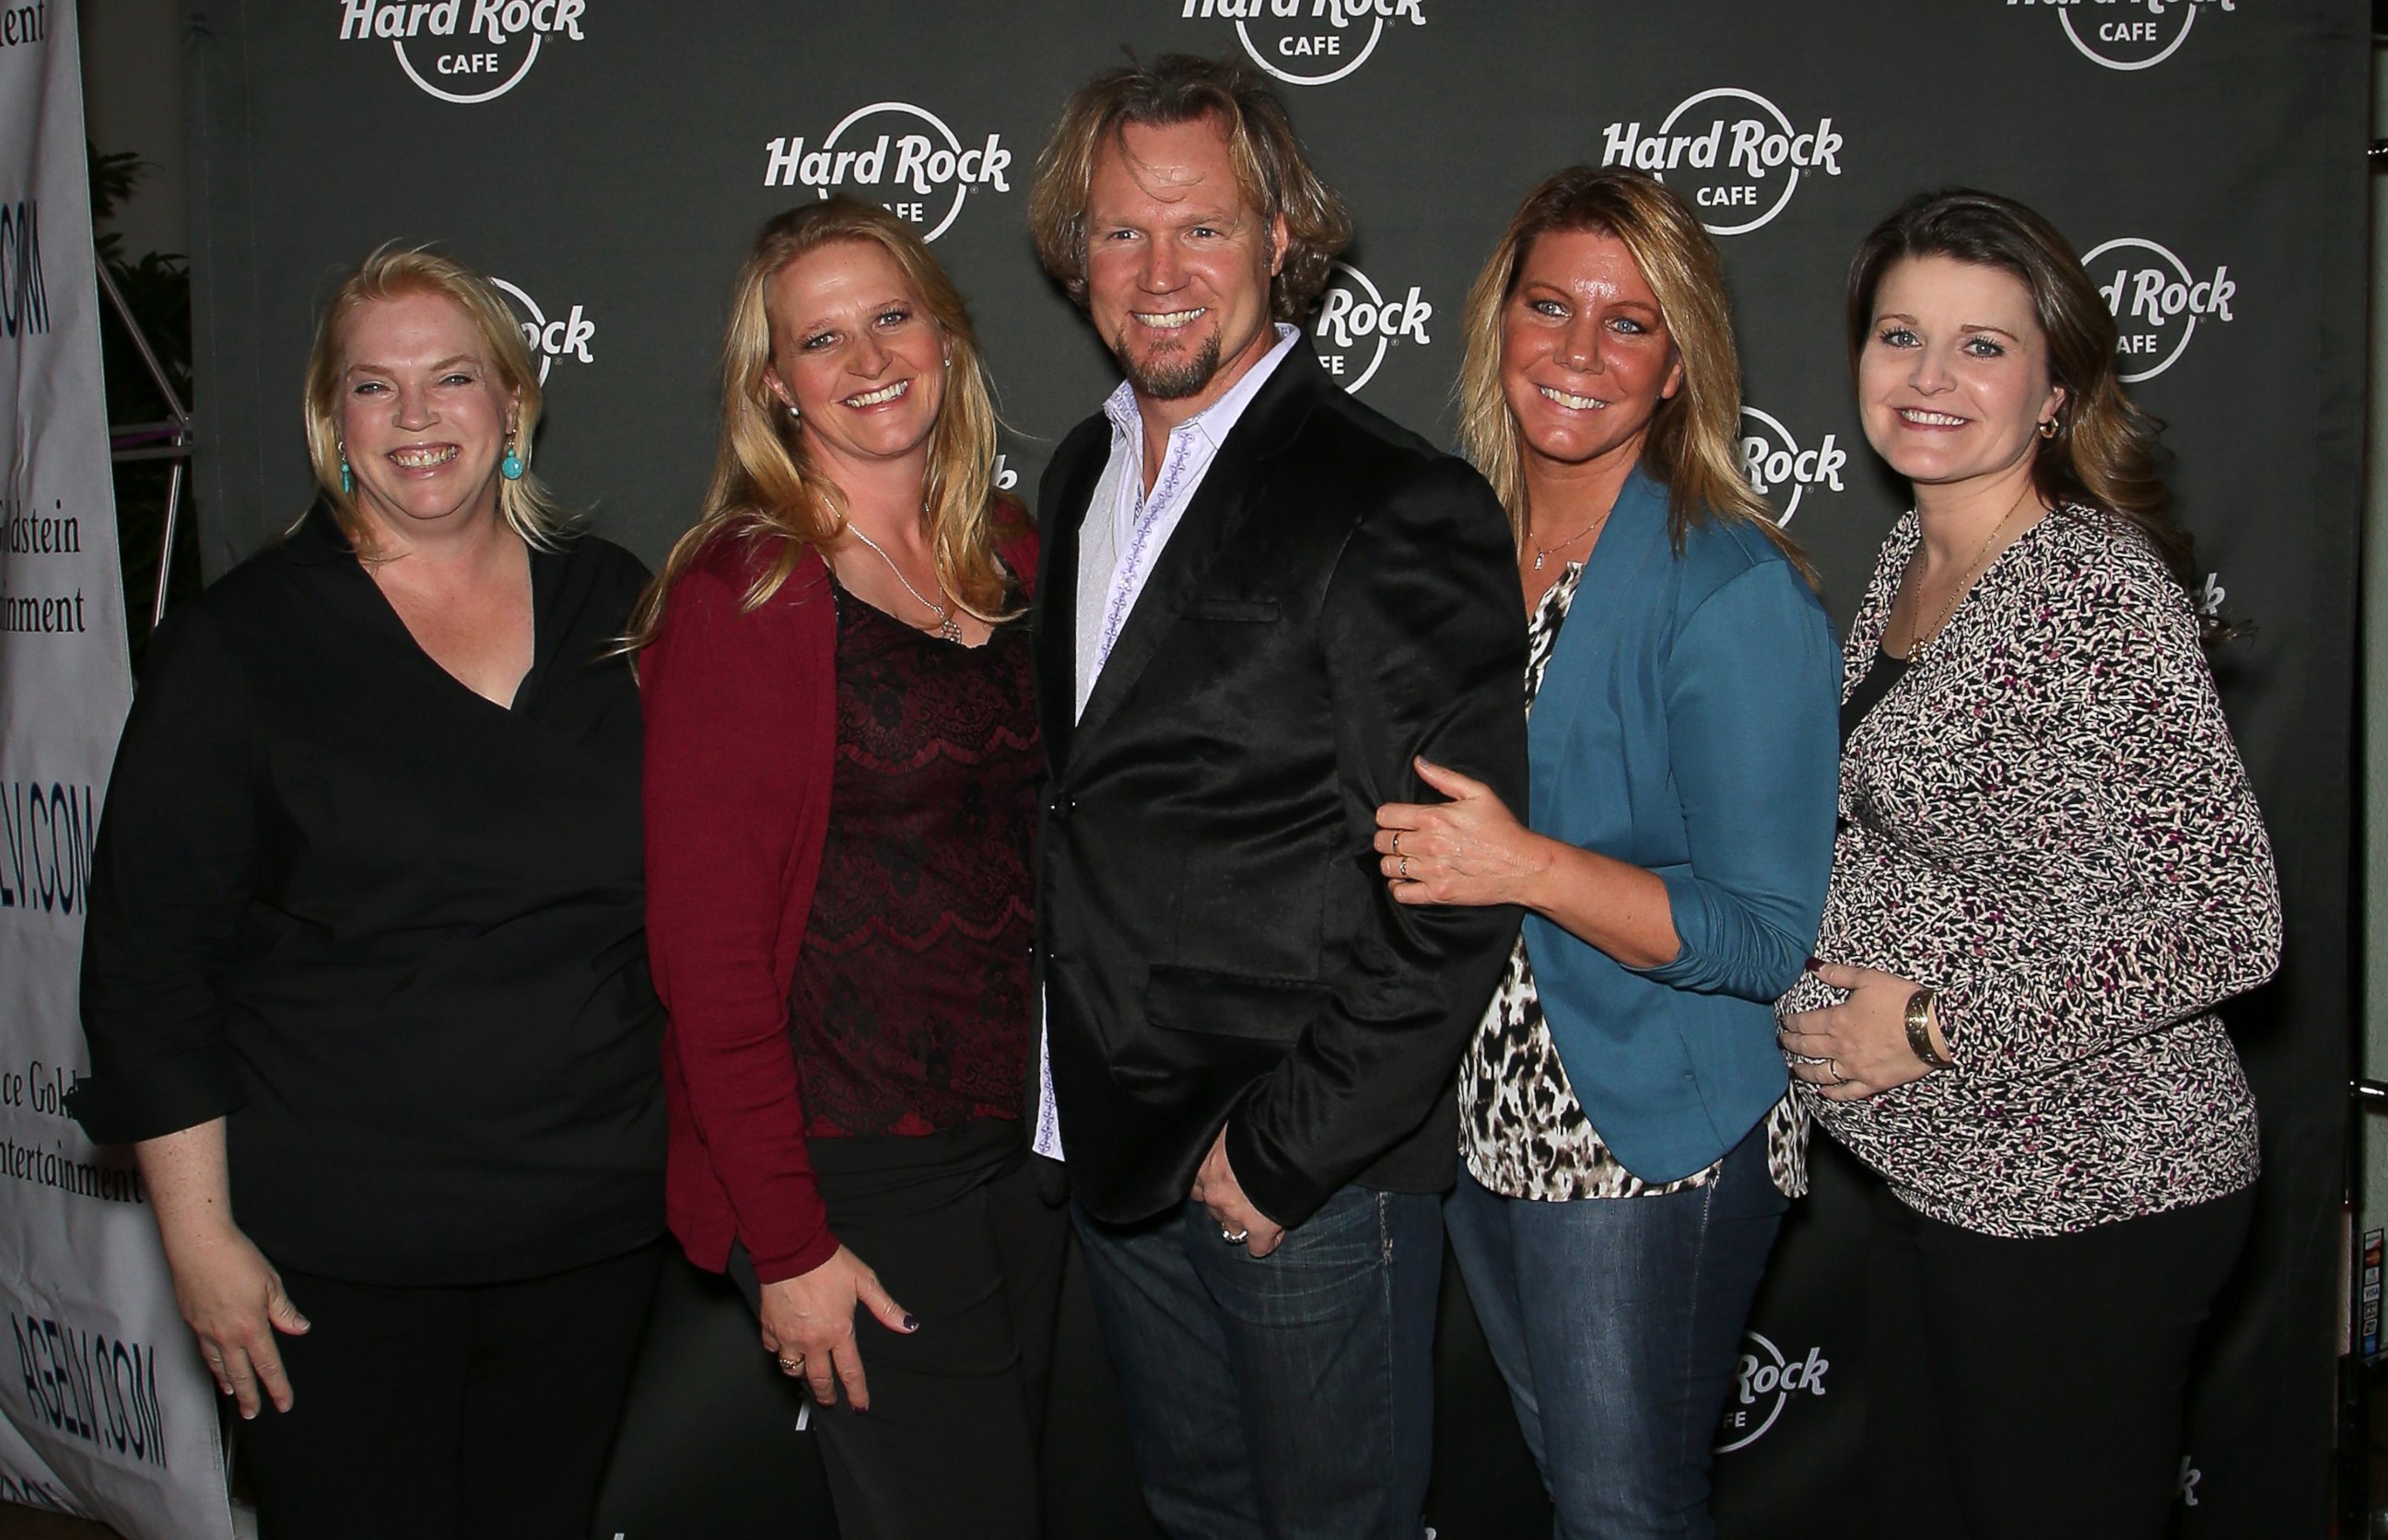 PHOTO: Television personalities Kody Brown (C) and his wives, (L-R) Janelle Brown, Christine Brown, Meri Brown and Robyn Brown, attend Hard Rock Cafe Las Vegas at Hard Rock Hotel's 25th anniversary celebration on Oct. 10, 2015 in Las Vegas. 